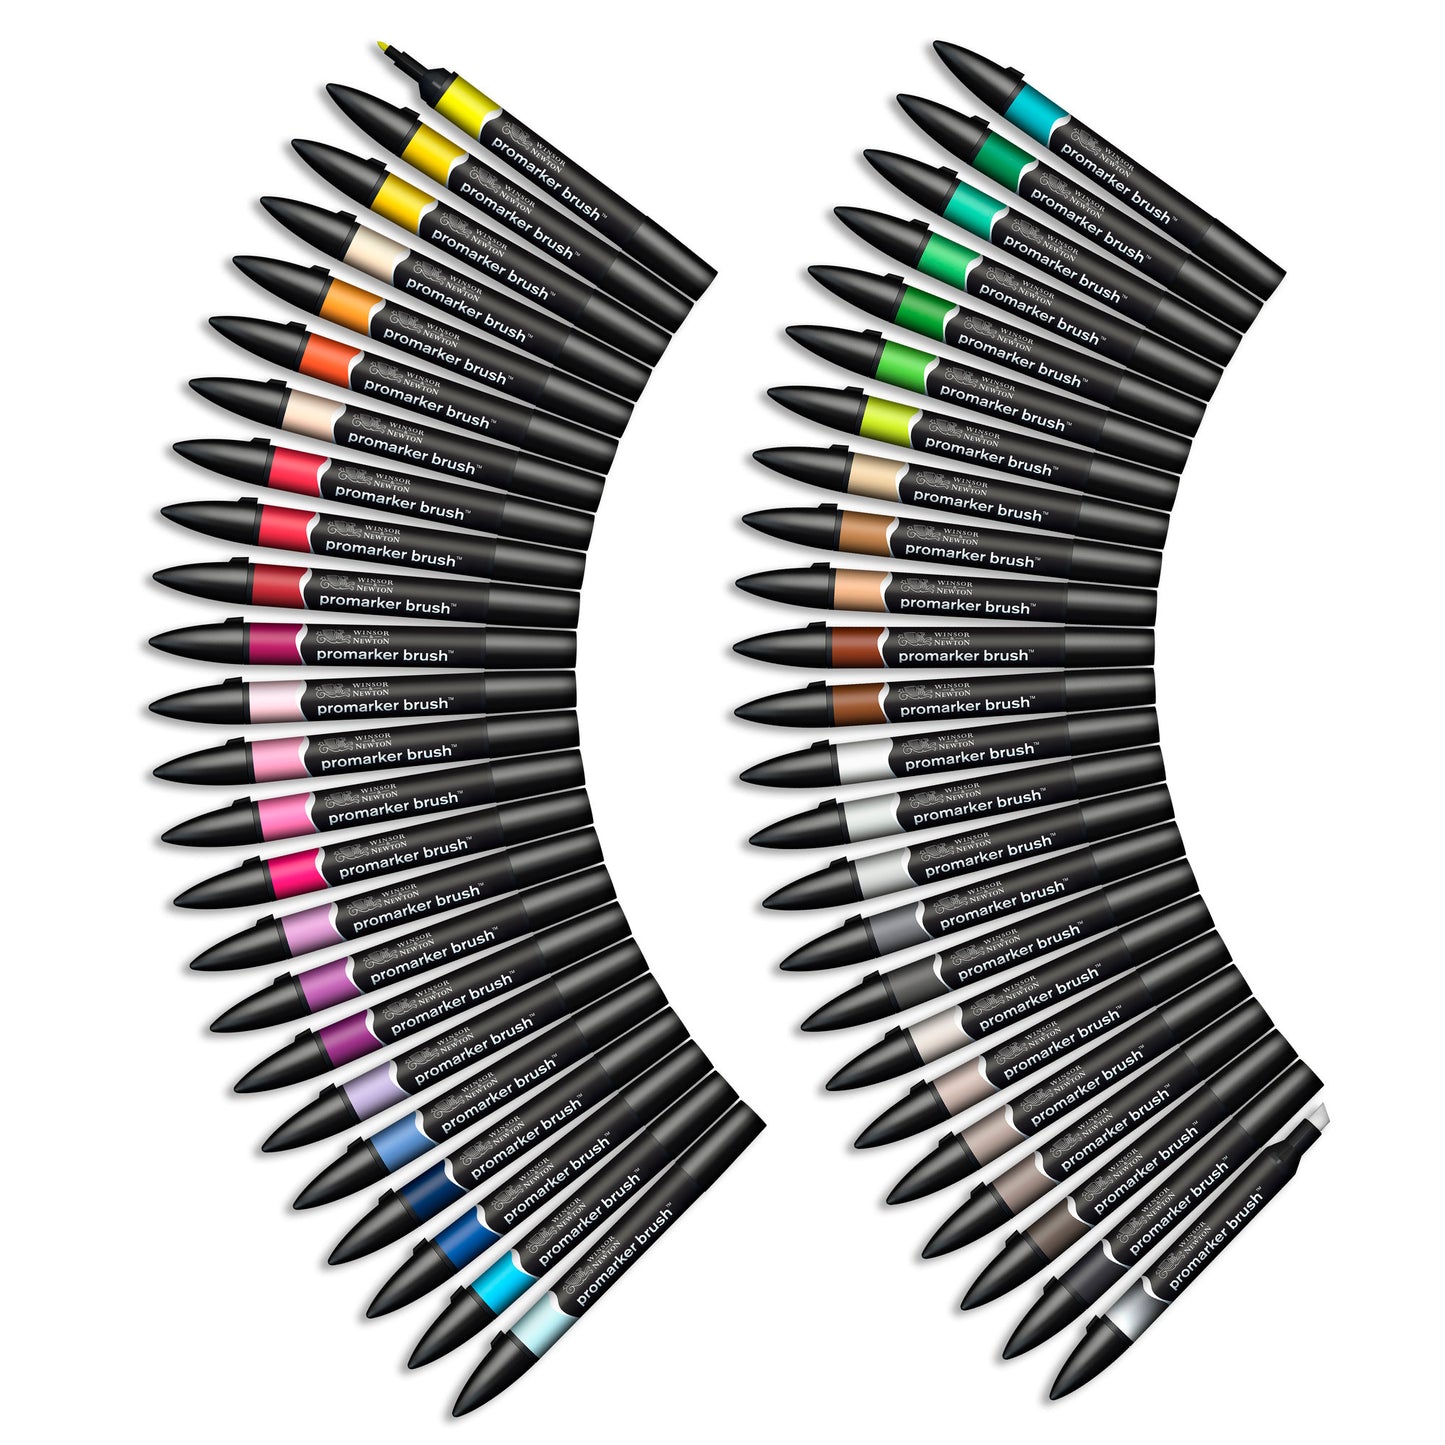 Winsor & Newton Promarker Brush 48 Essential Collection